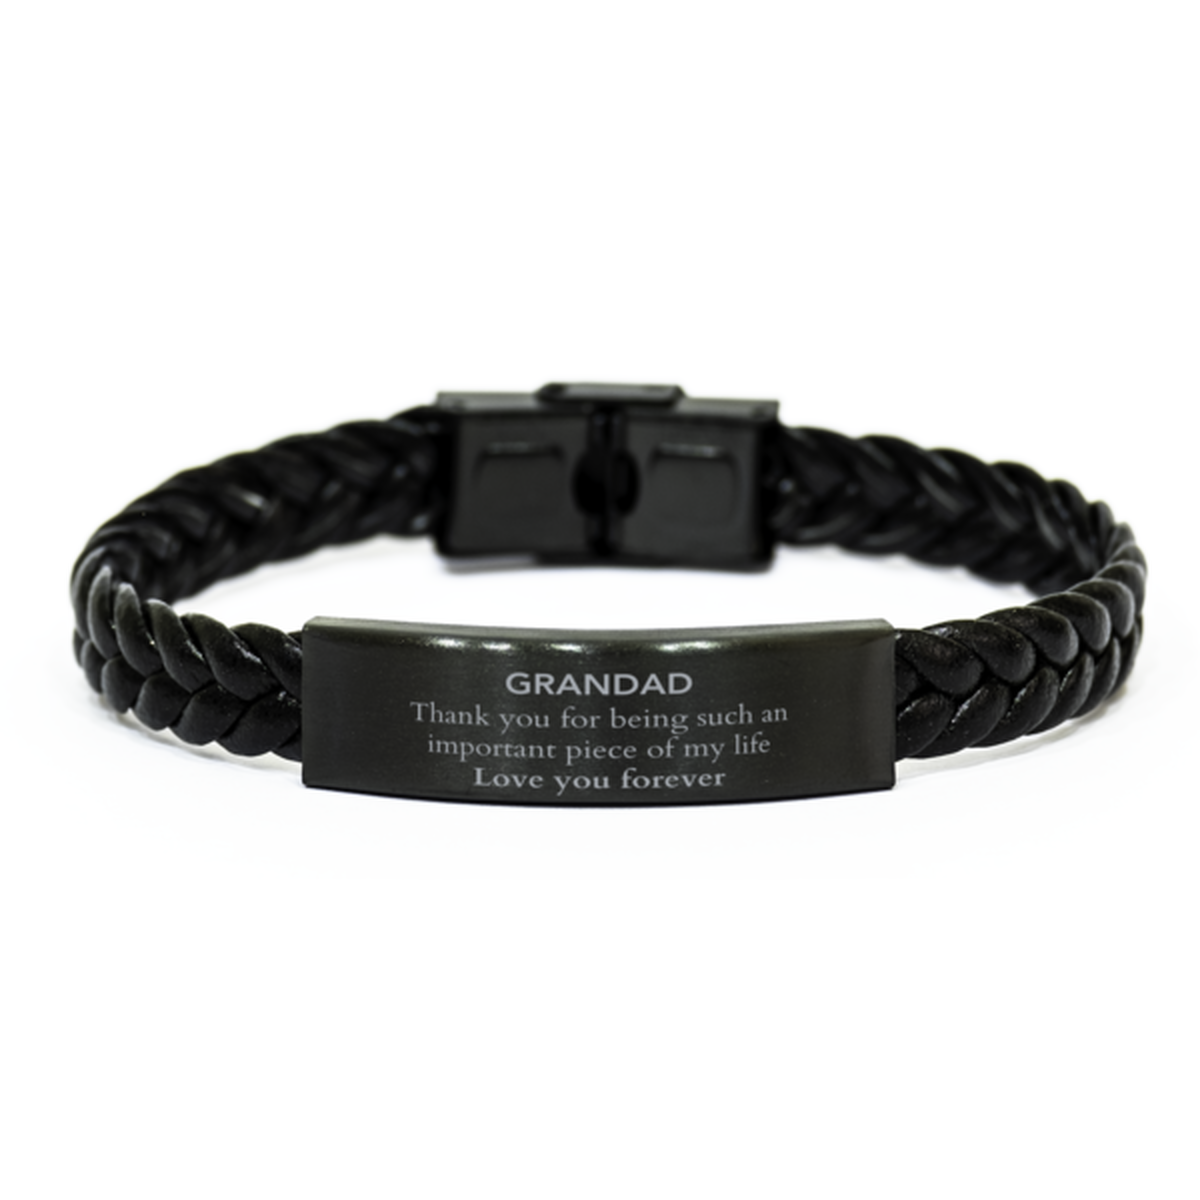 Appropriate Grandad Braided Leather Bracelet Epic Birthday Gifts for Grandad Thank you for being such an important piece of my life Grandad Christmas Mothers Fathers Day